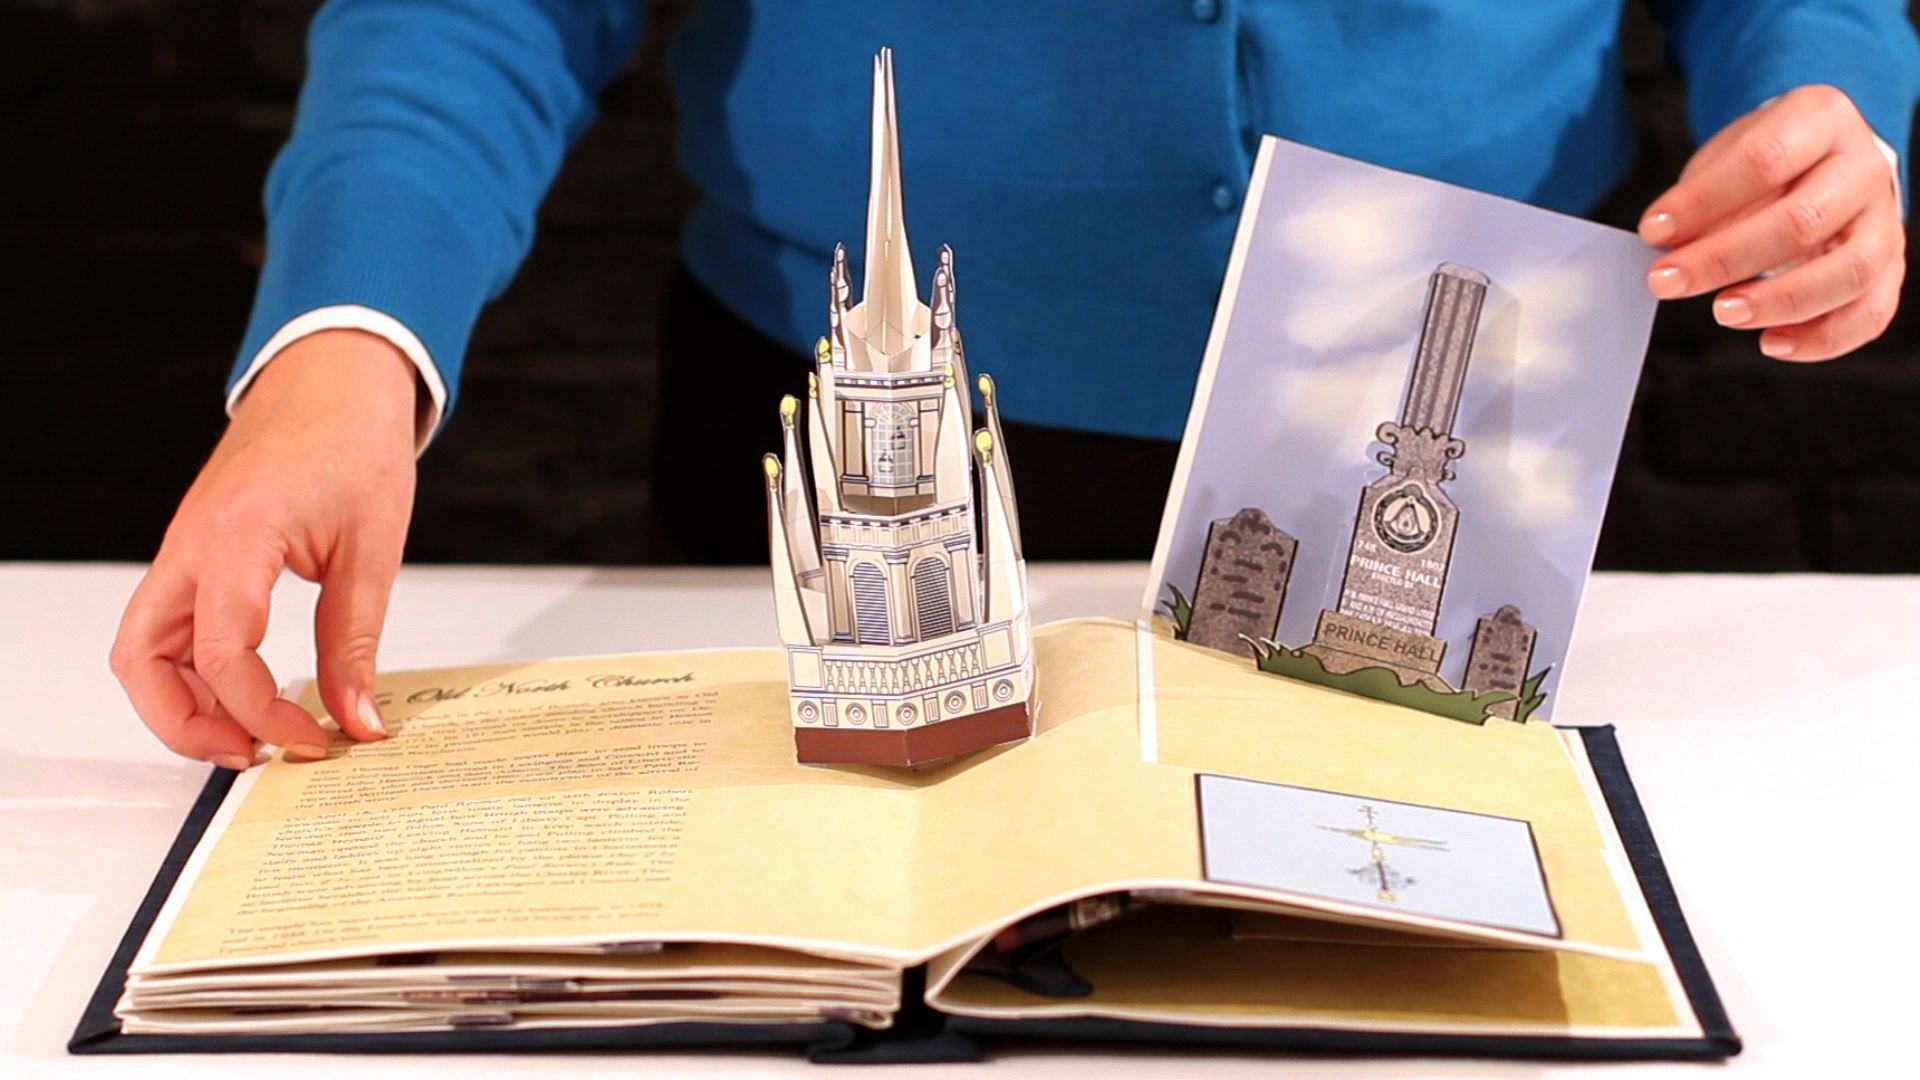 The history of pop-up books